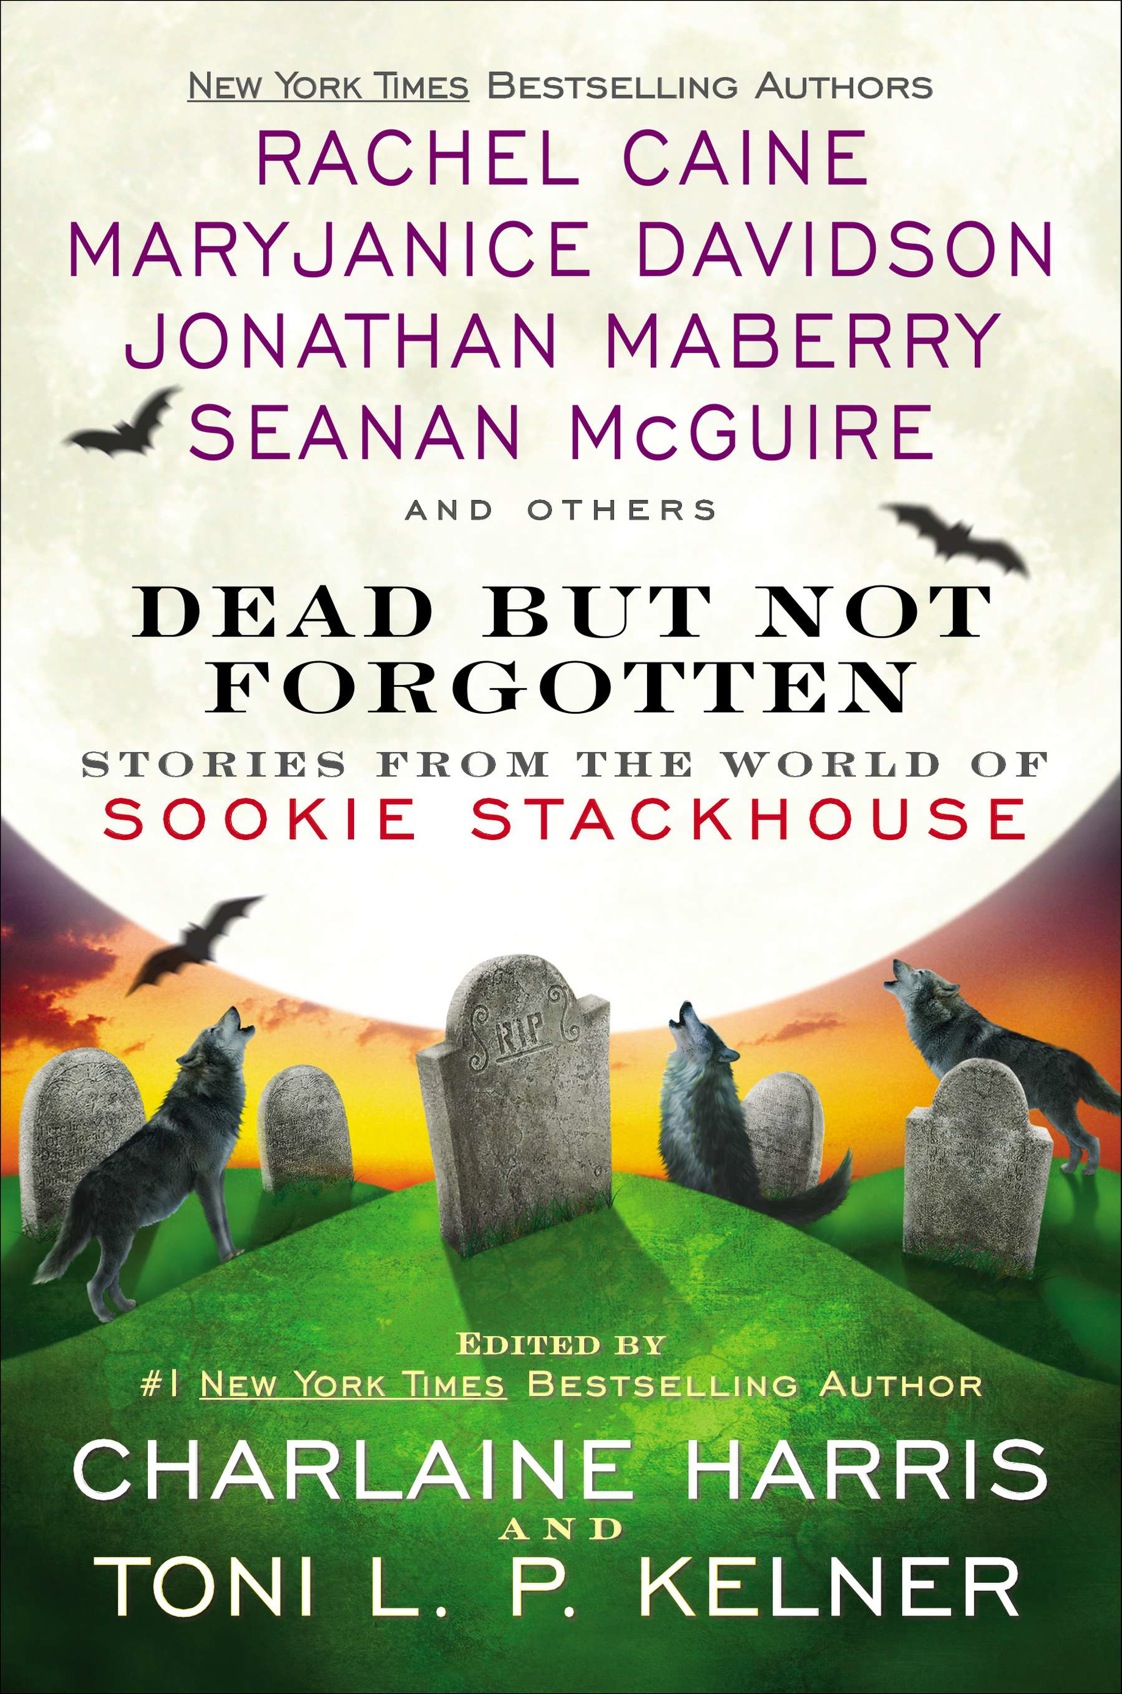 Dead But Not Forgotten (2014) by Charlaine Harris